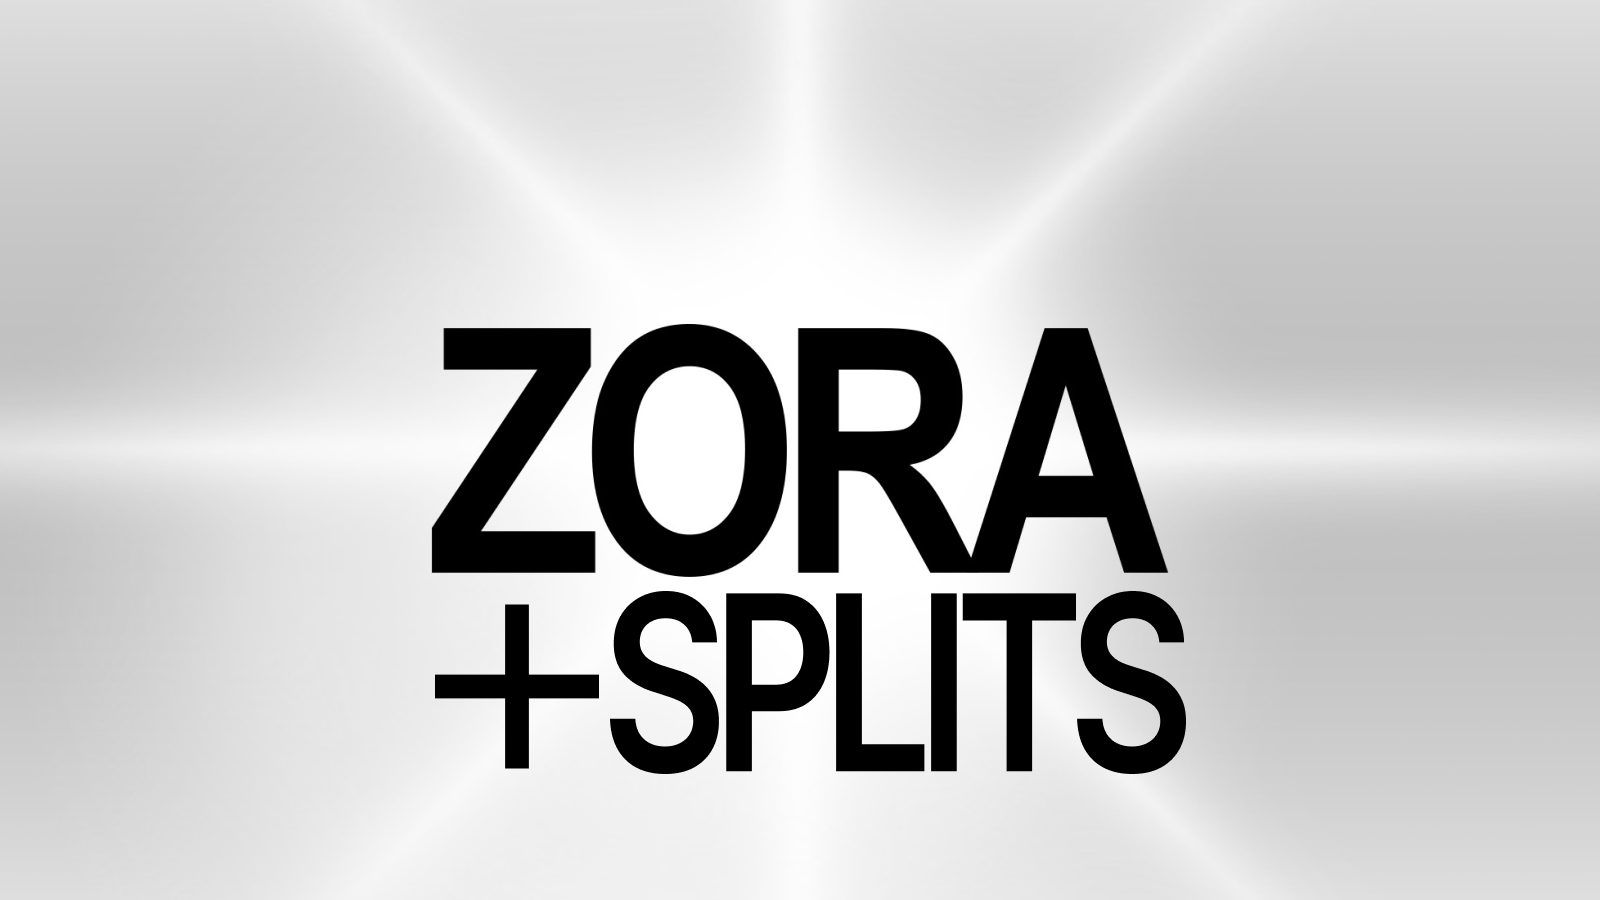 Zora integrates Splits, enabling artists to collaborate and earn onchain